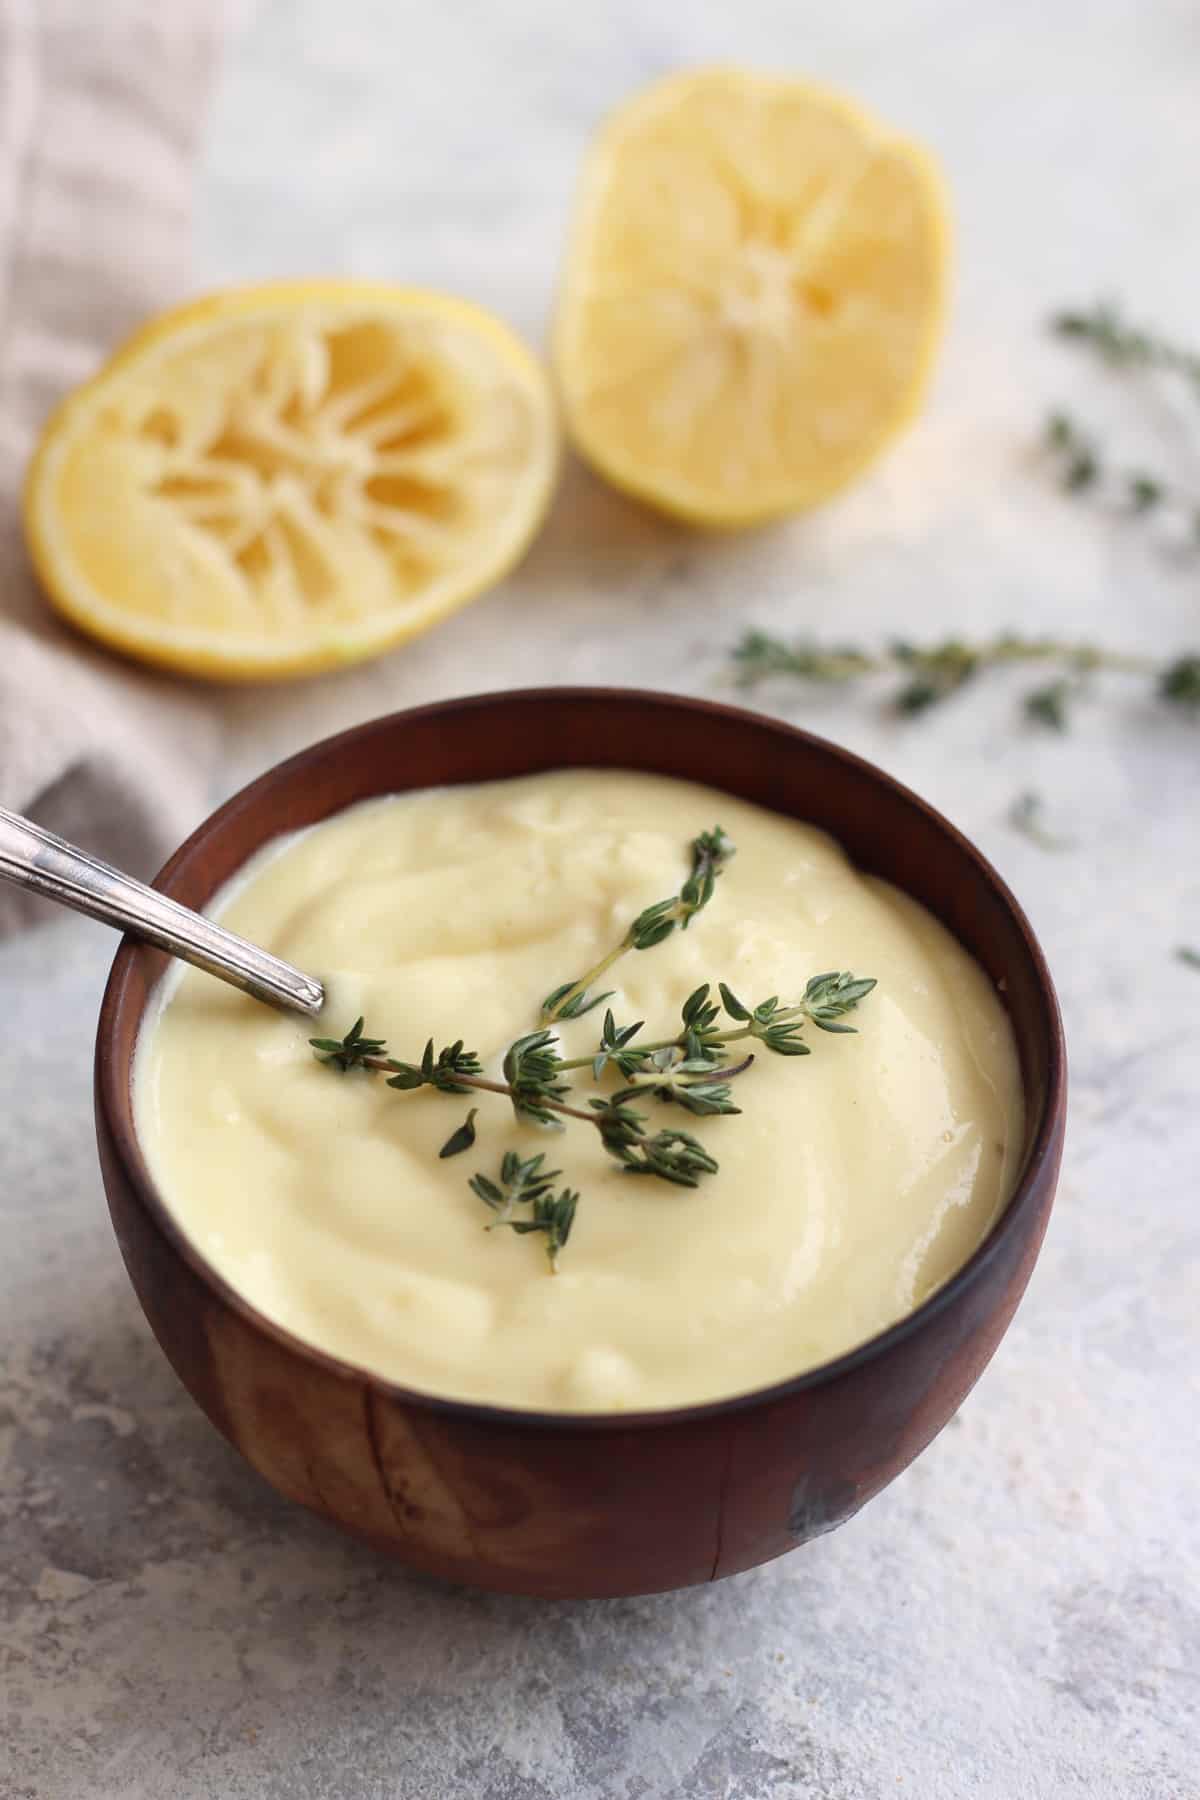 This is an aioli recipe made from scratch that's foolproof and easy to make.